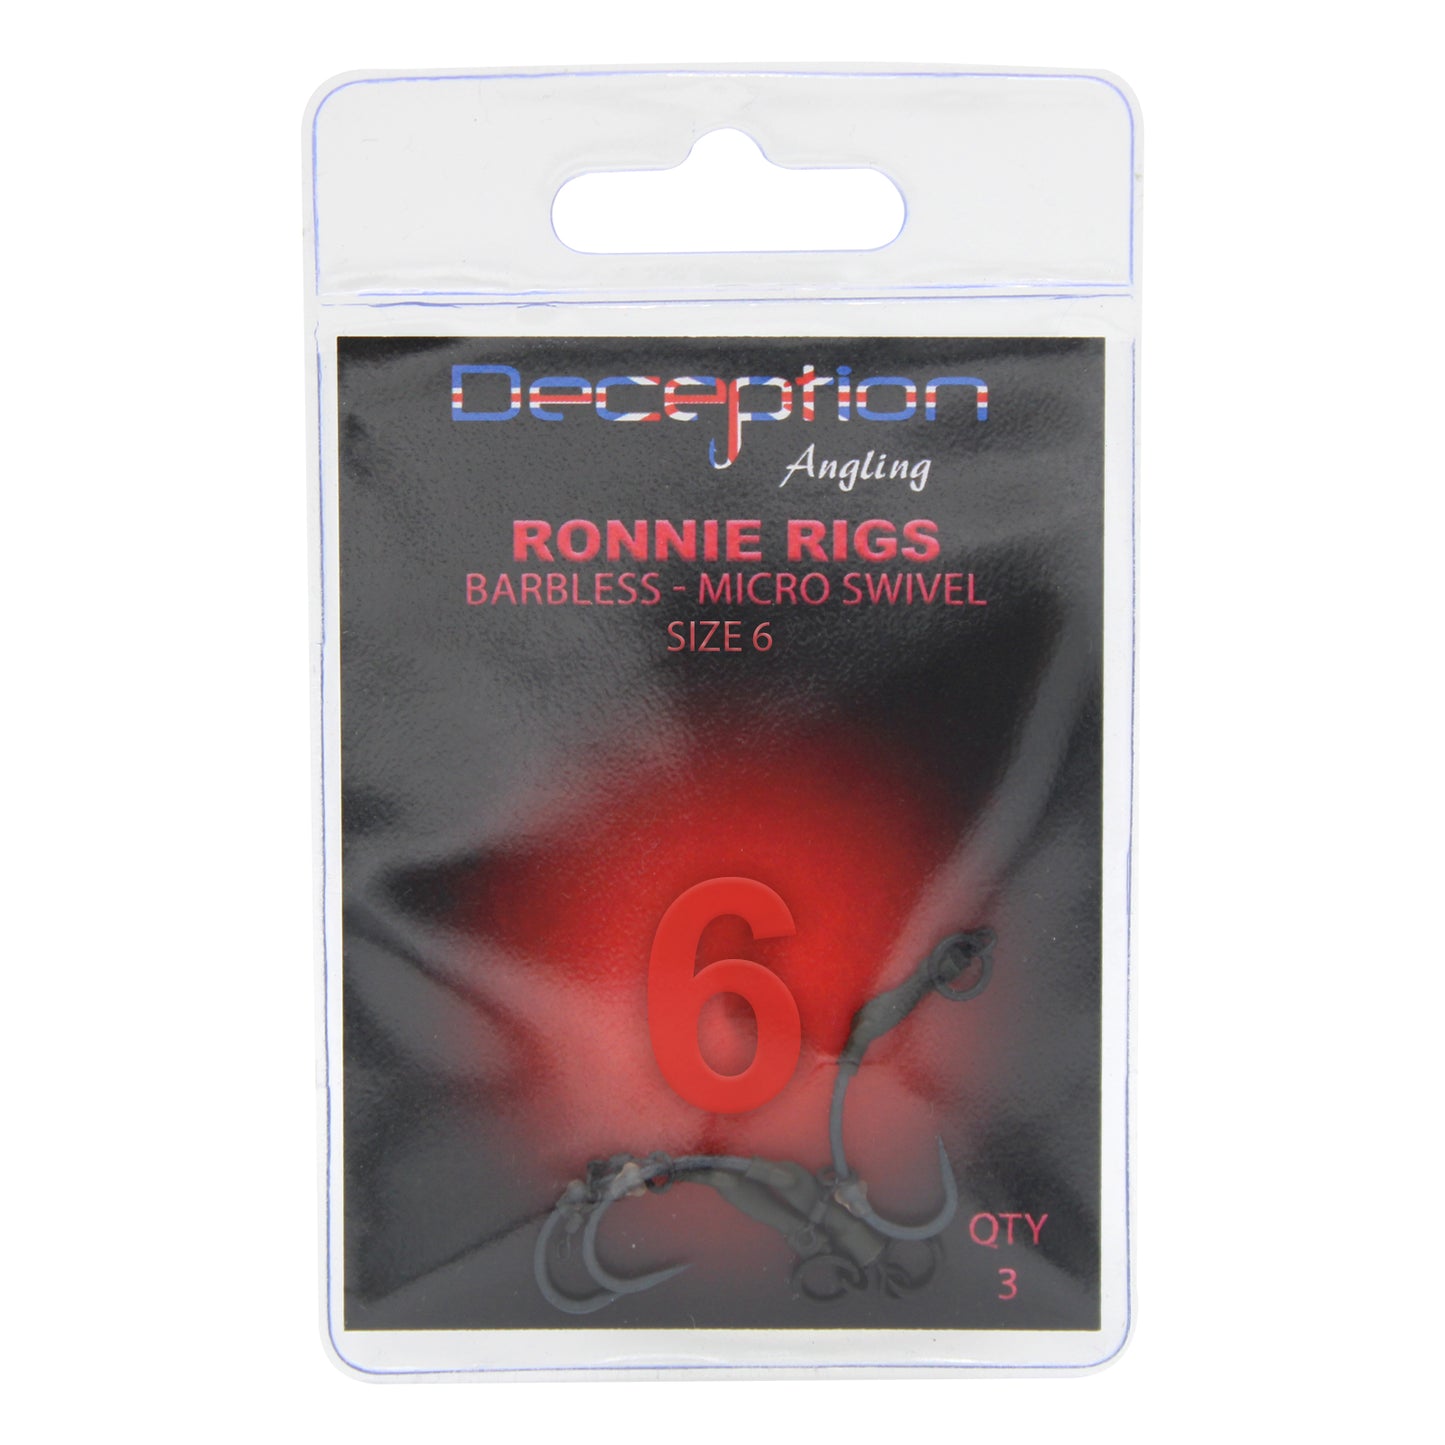 Ronnie Rigs Barbless Micro Swivel Fishing Hooks Size 6